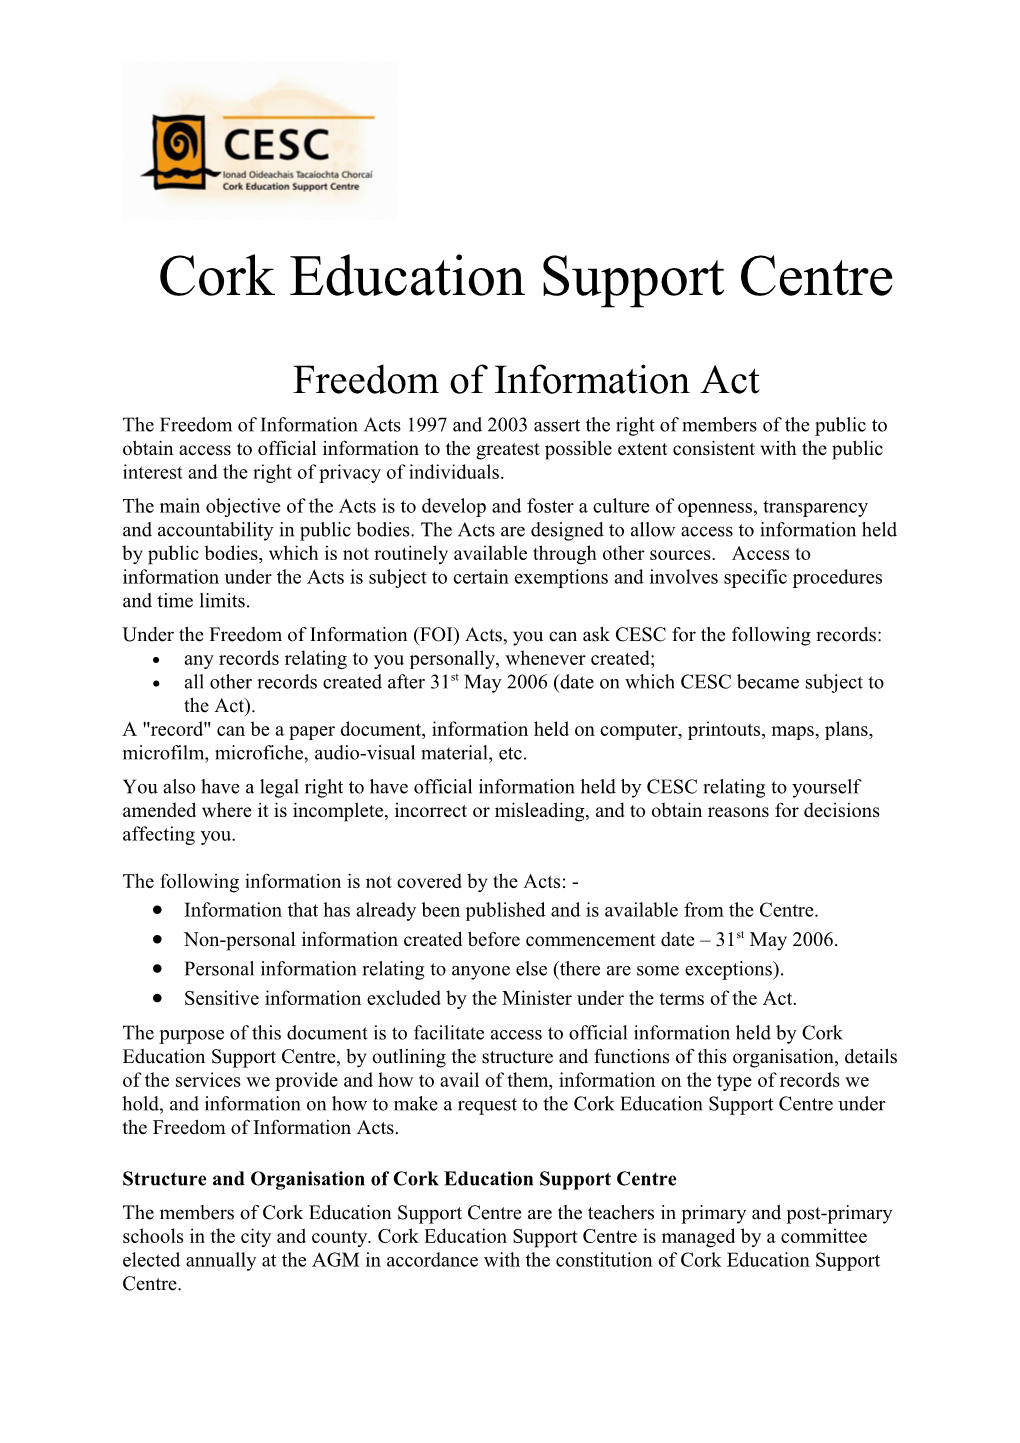 Freedom of Information Cork Education Support Centre